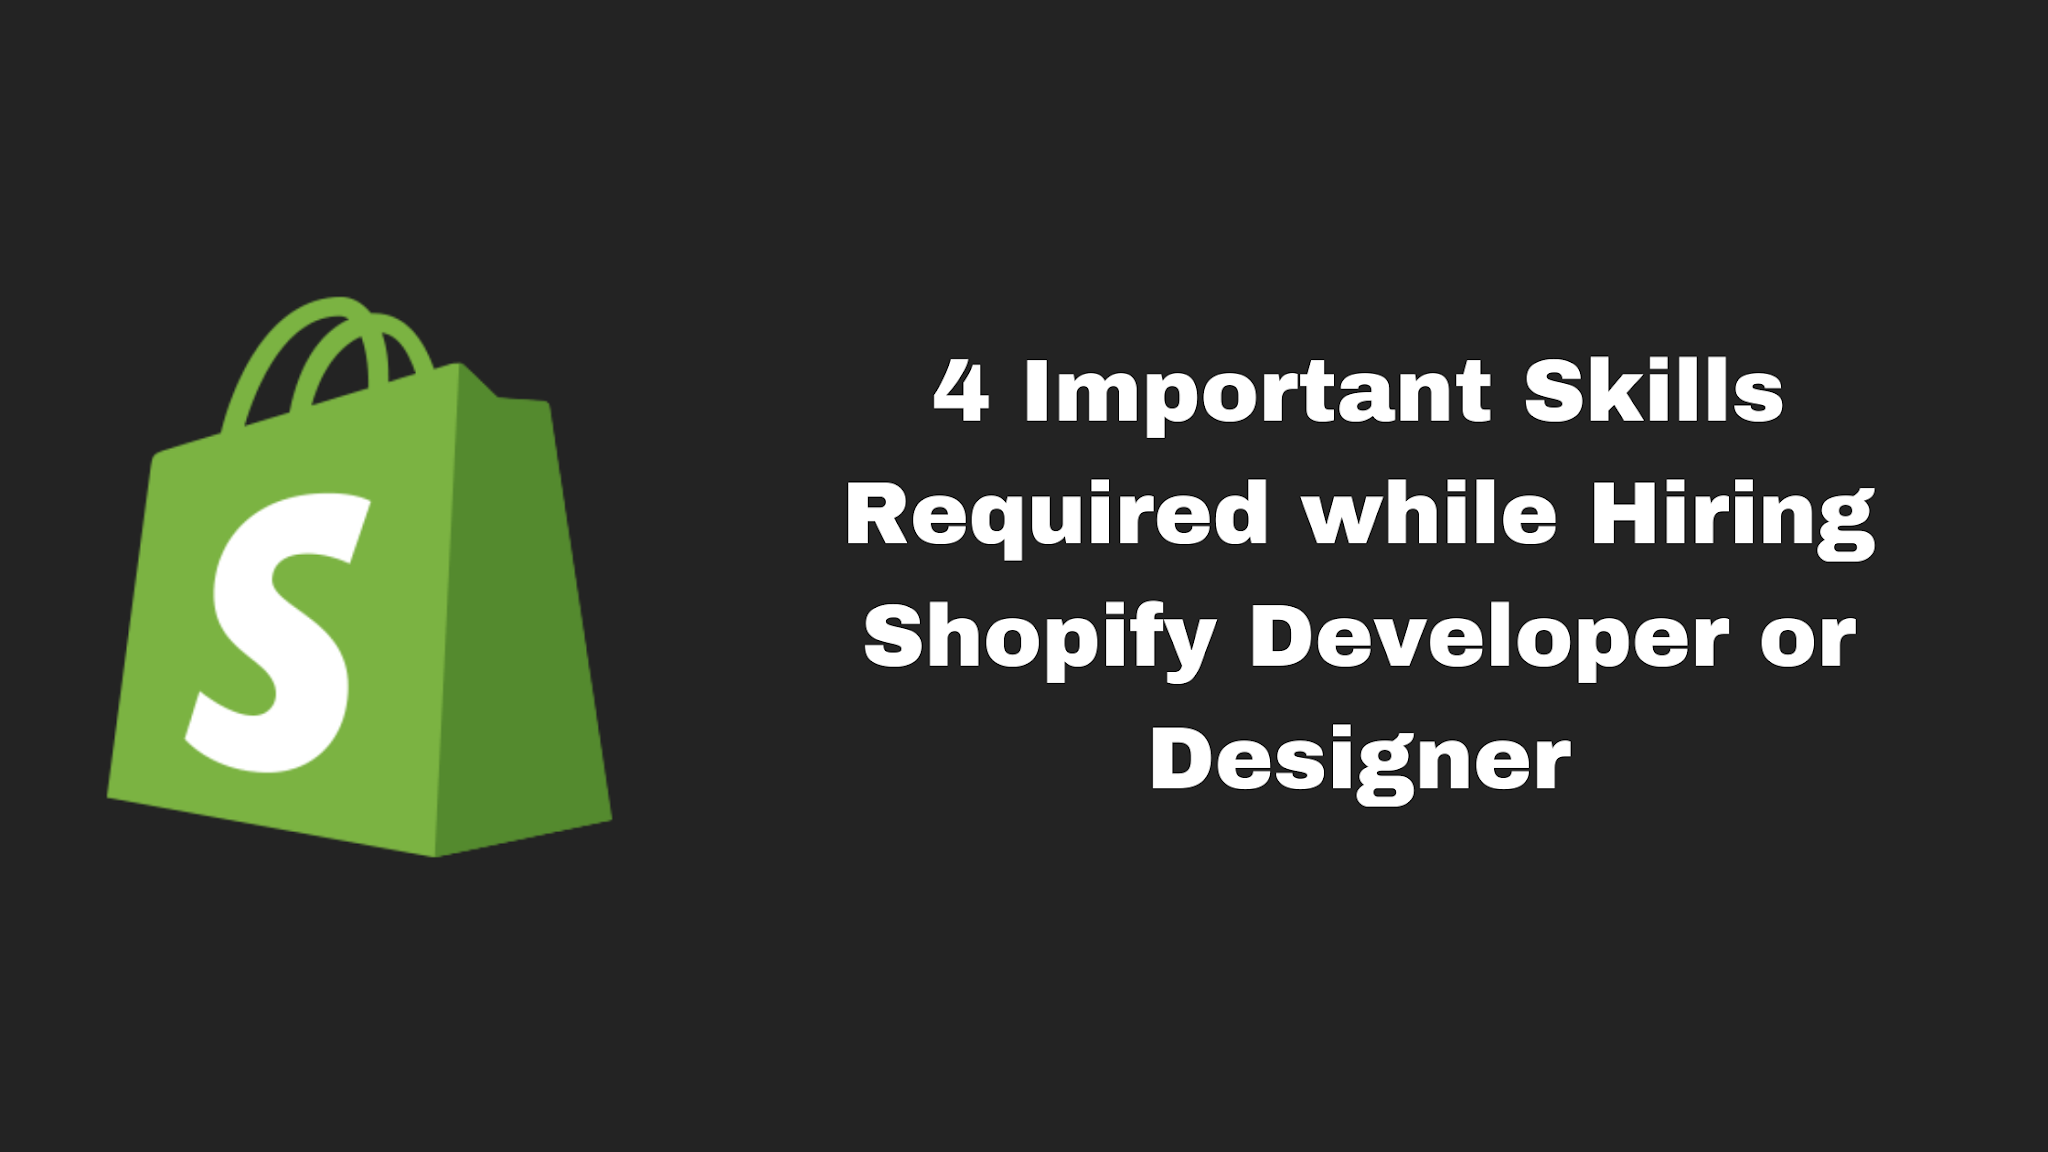 4 Important Skills Required while Hiring Shopify Developer or Designer